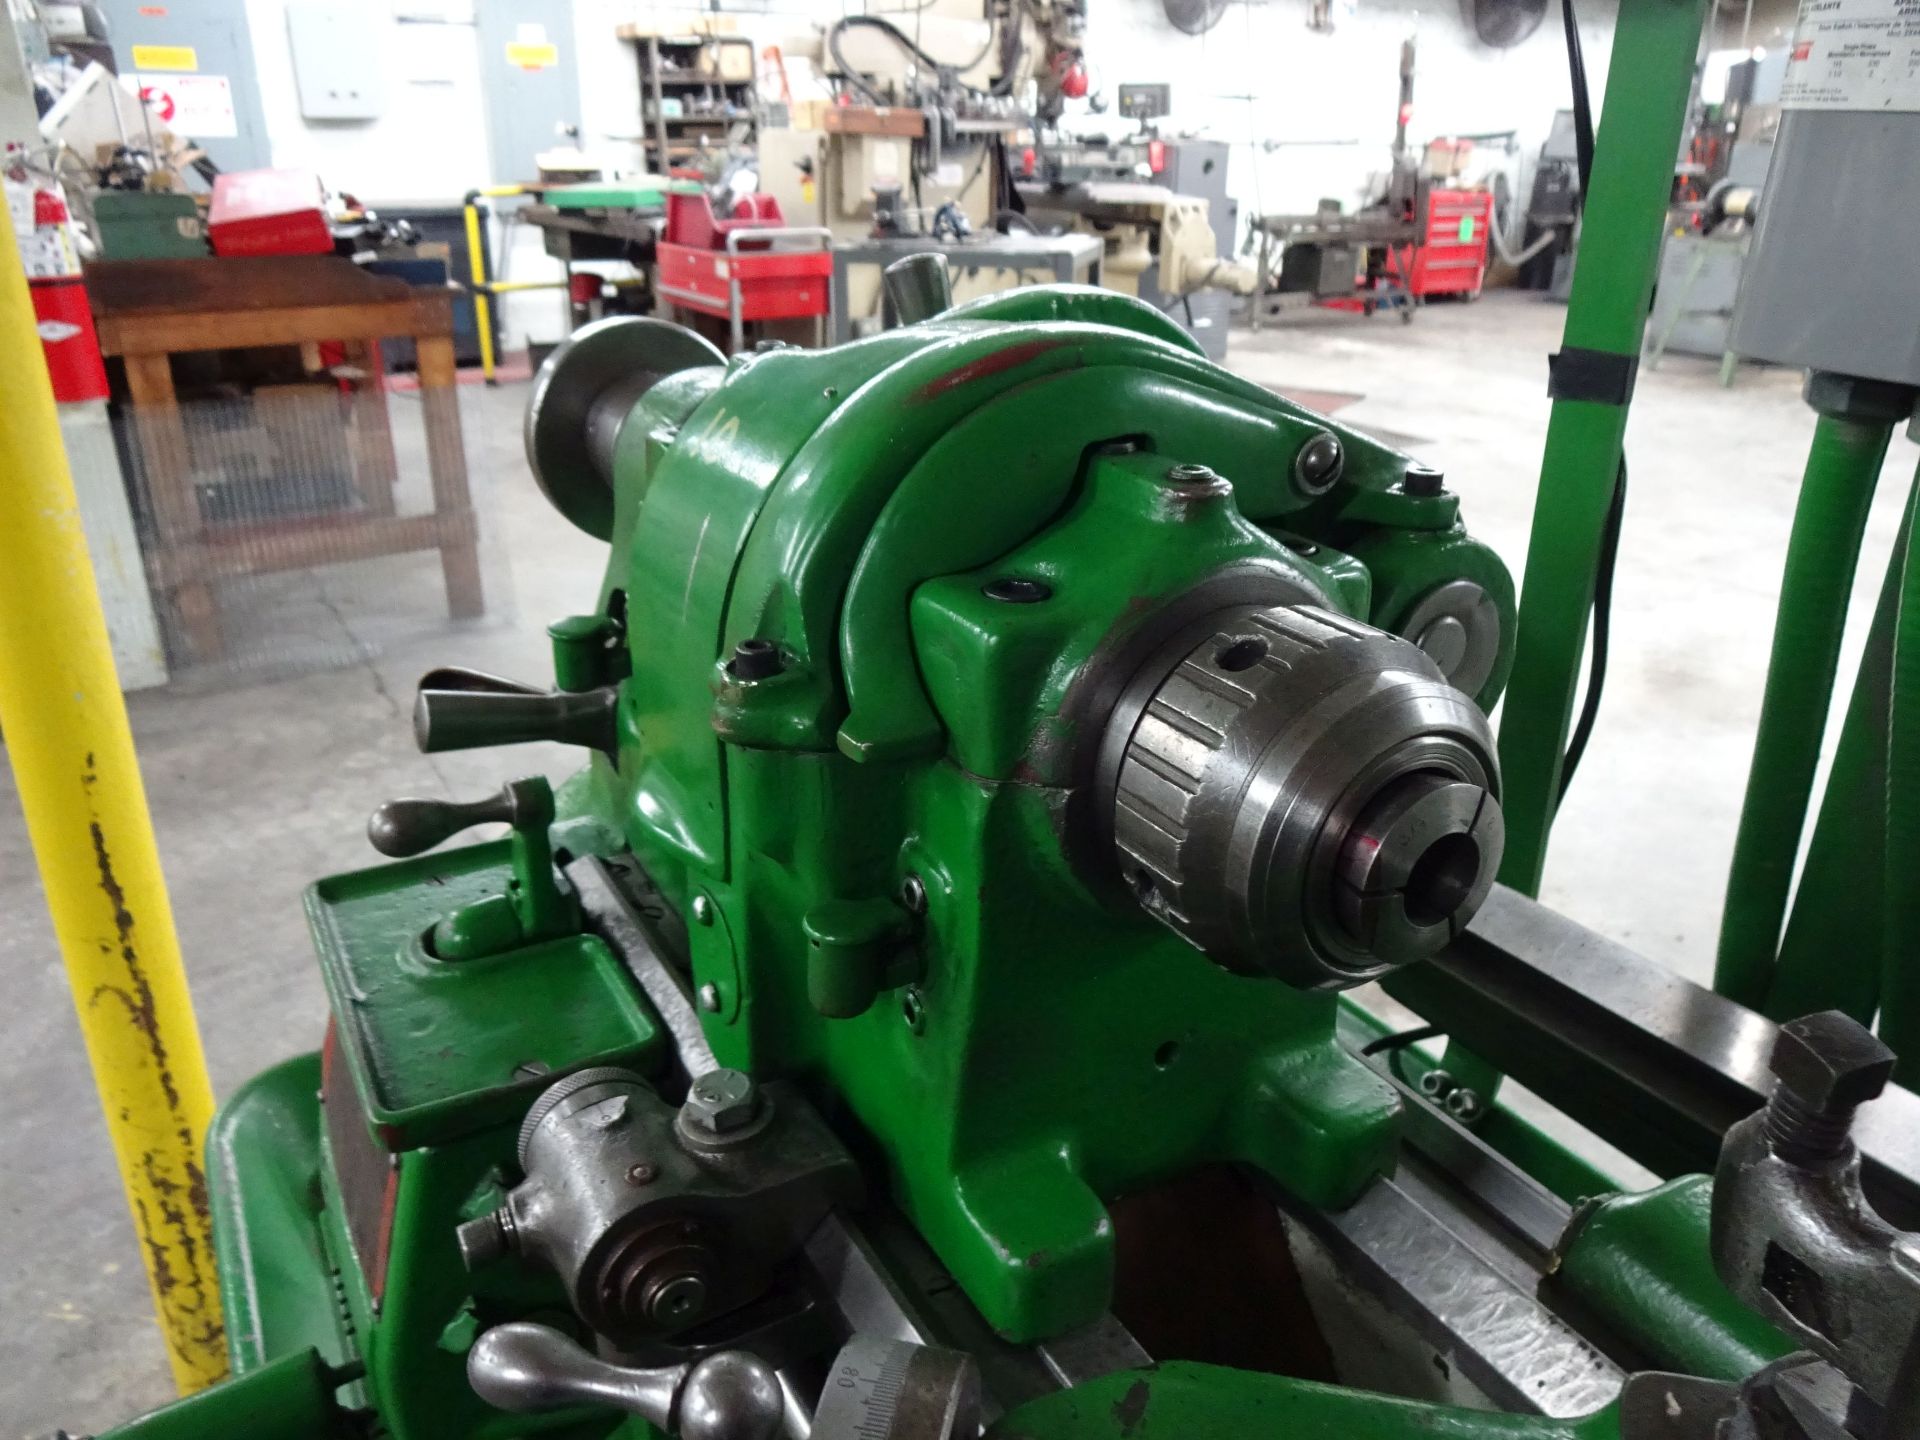 10" X 30" SOUTH BEND ENGINE LATHE; S/N 1036RKL8, COLLET CHUCK, STEADY REST, TOOLHOLDER - Image 3 of 7